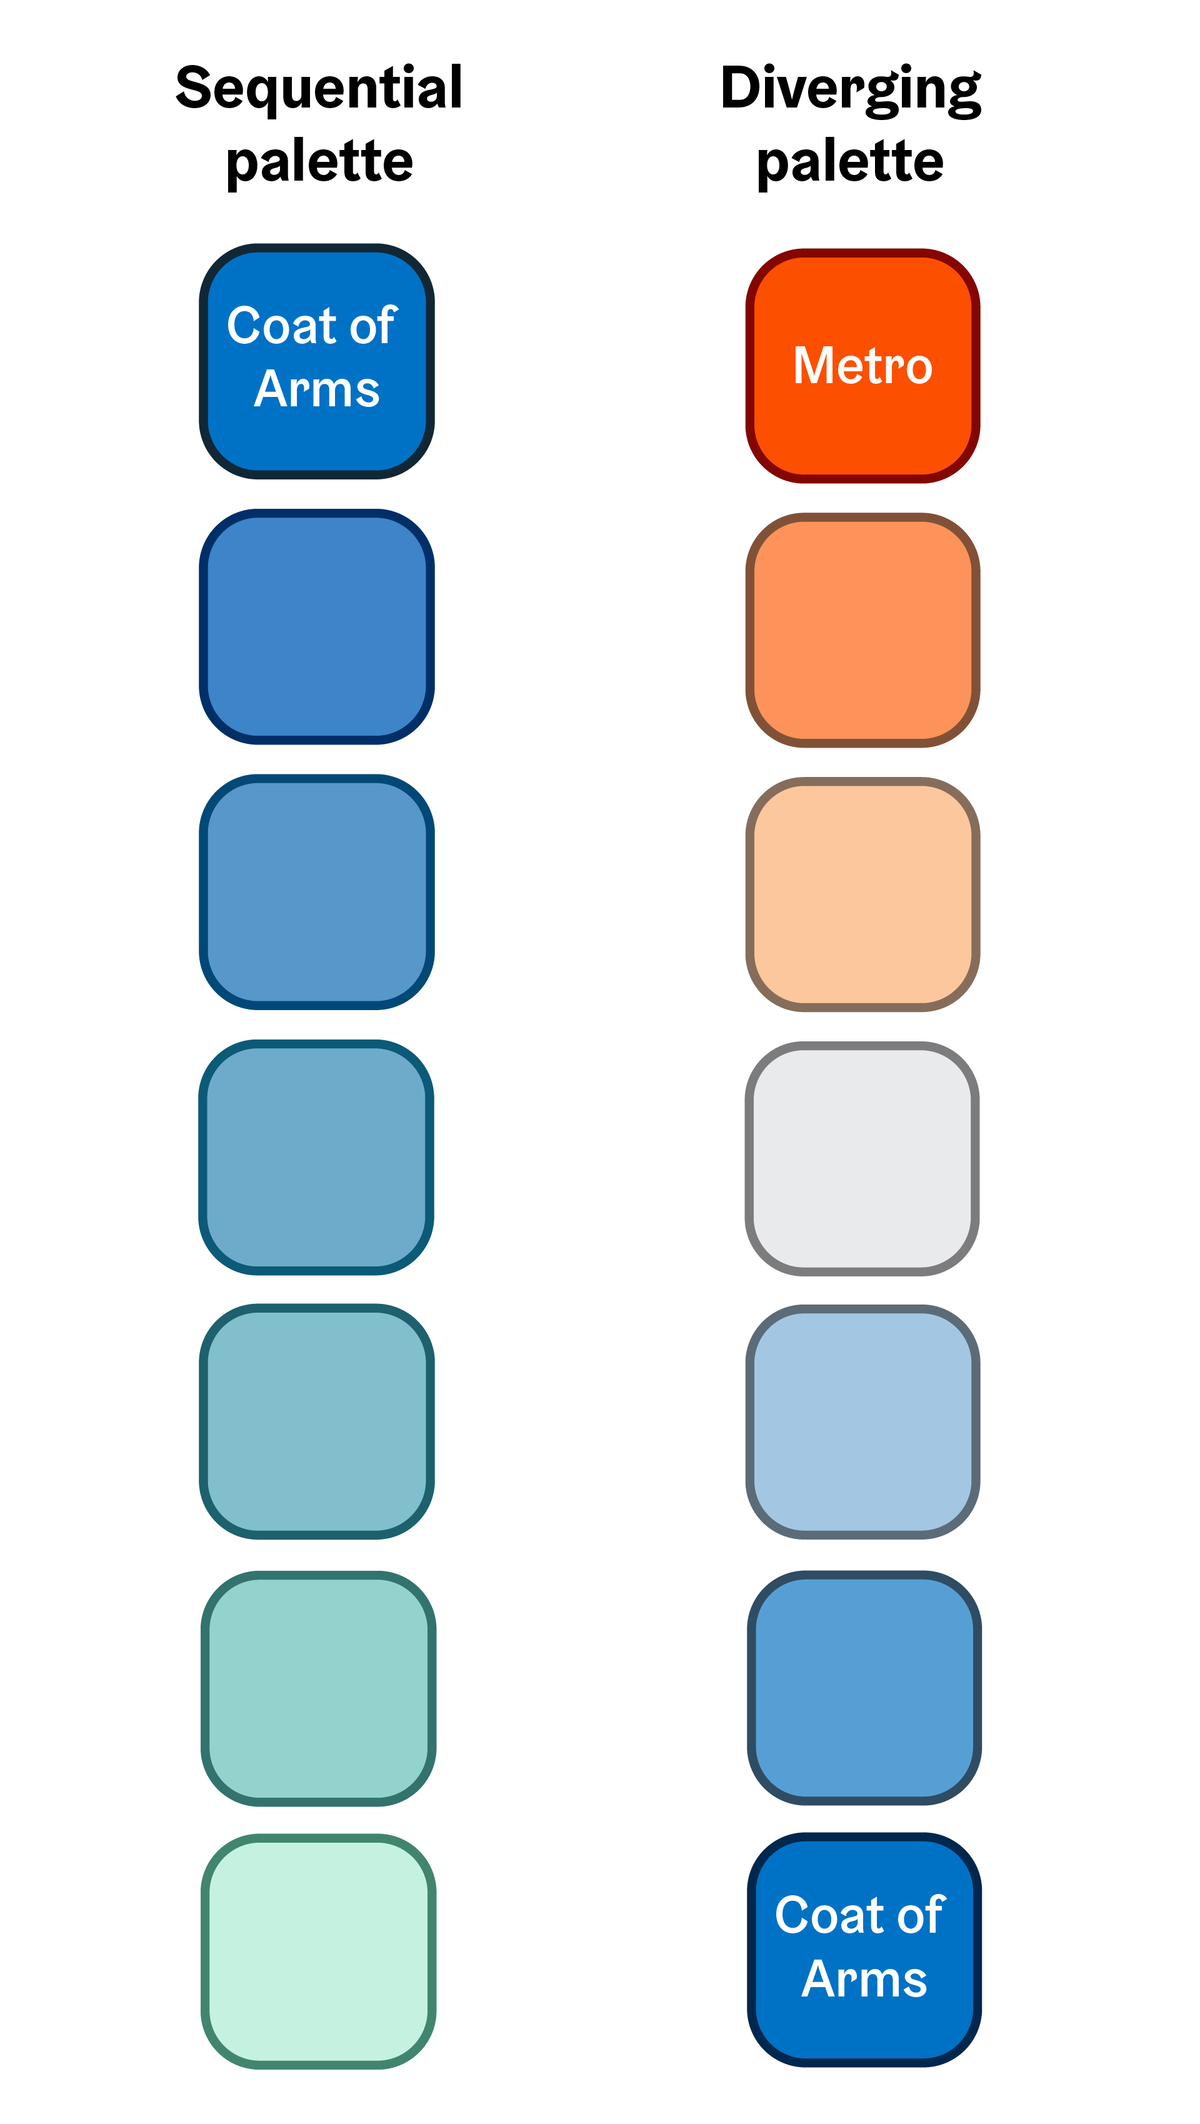 Examples of sequantial and diverging palettes